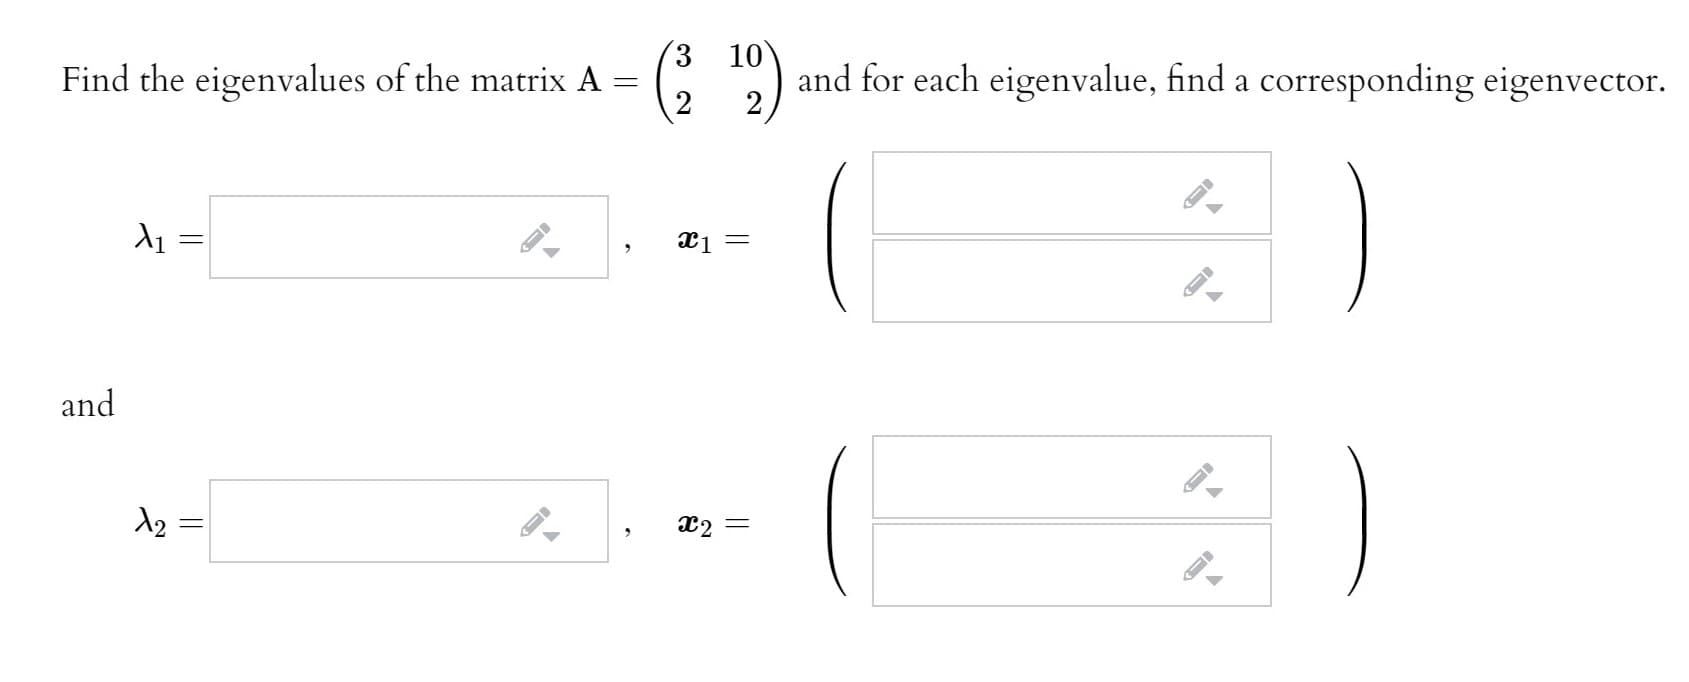 3 10
Find the eigenvalues of the matrix A =
and for each eigenvalue, find a corresponding eigenvector.
2
ӕ1 —
and
)
ӕ2 —
